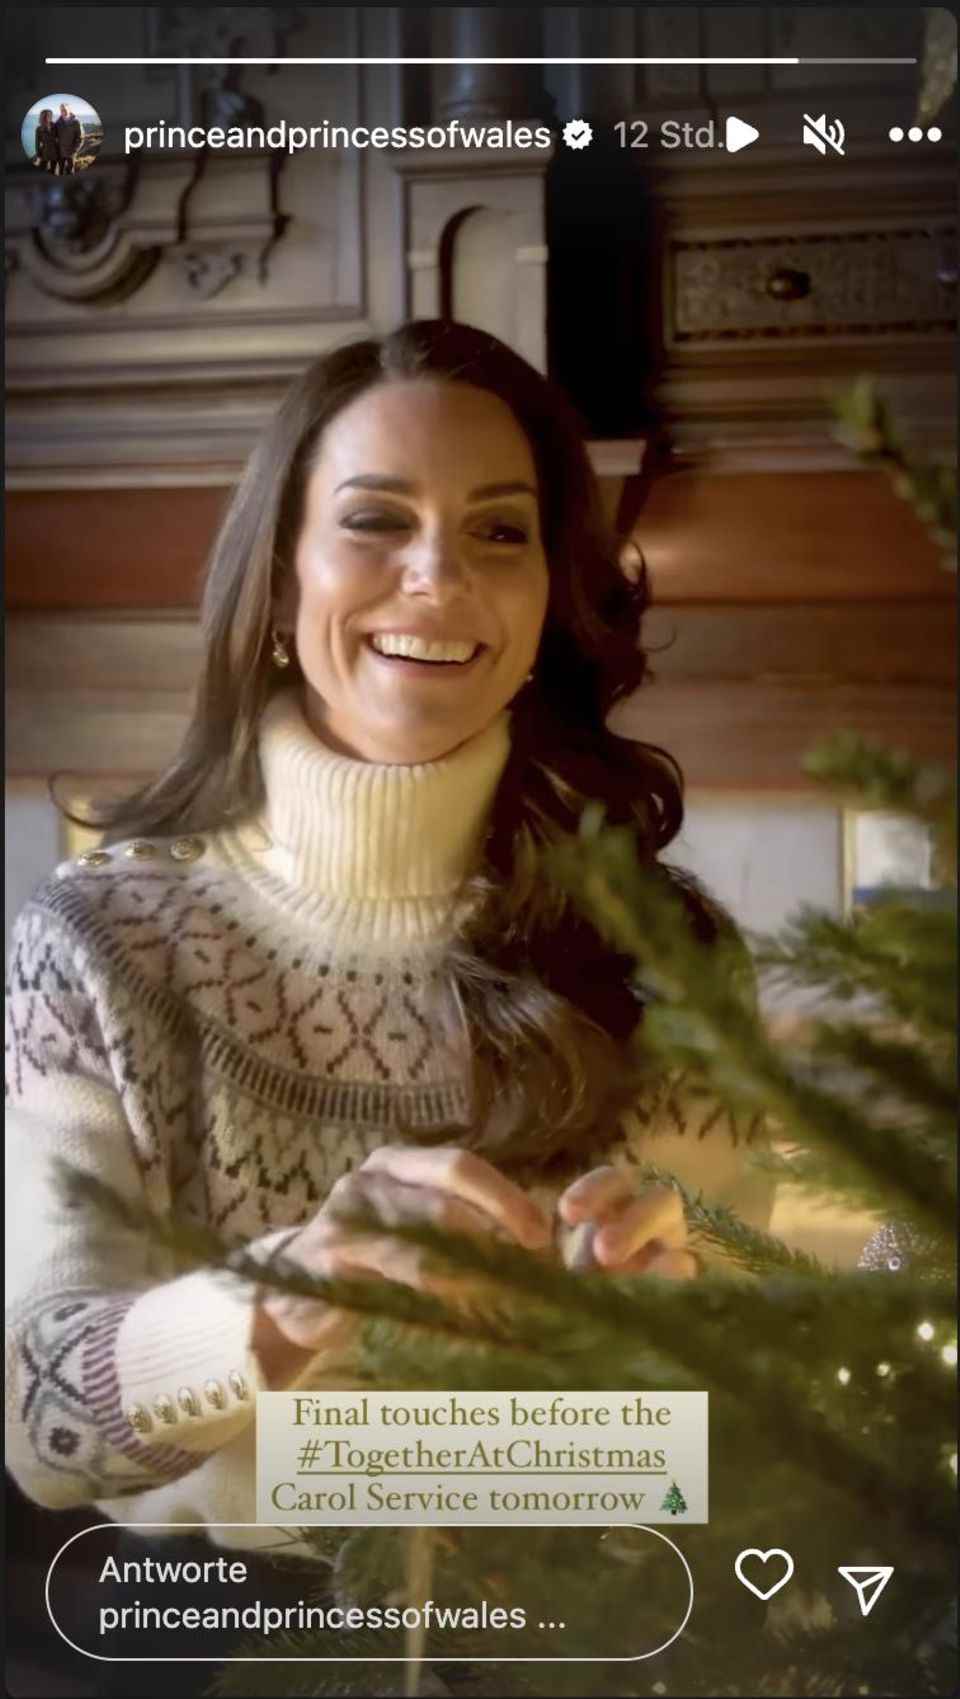 Is Kate also dressed so comfortably and festively for Christmas? 